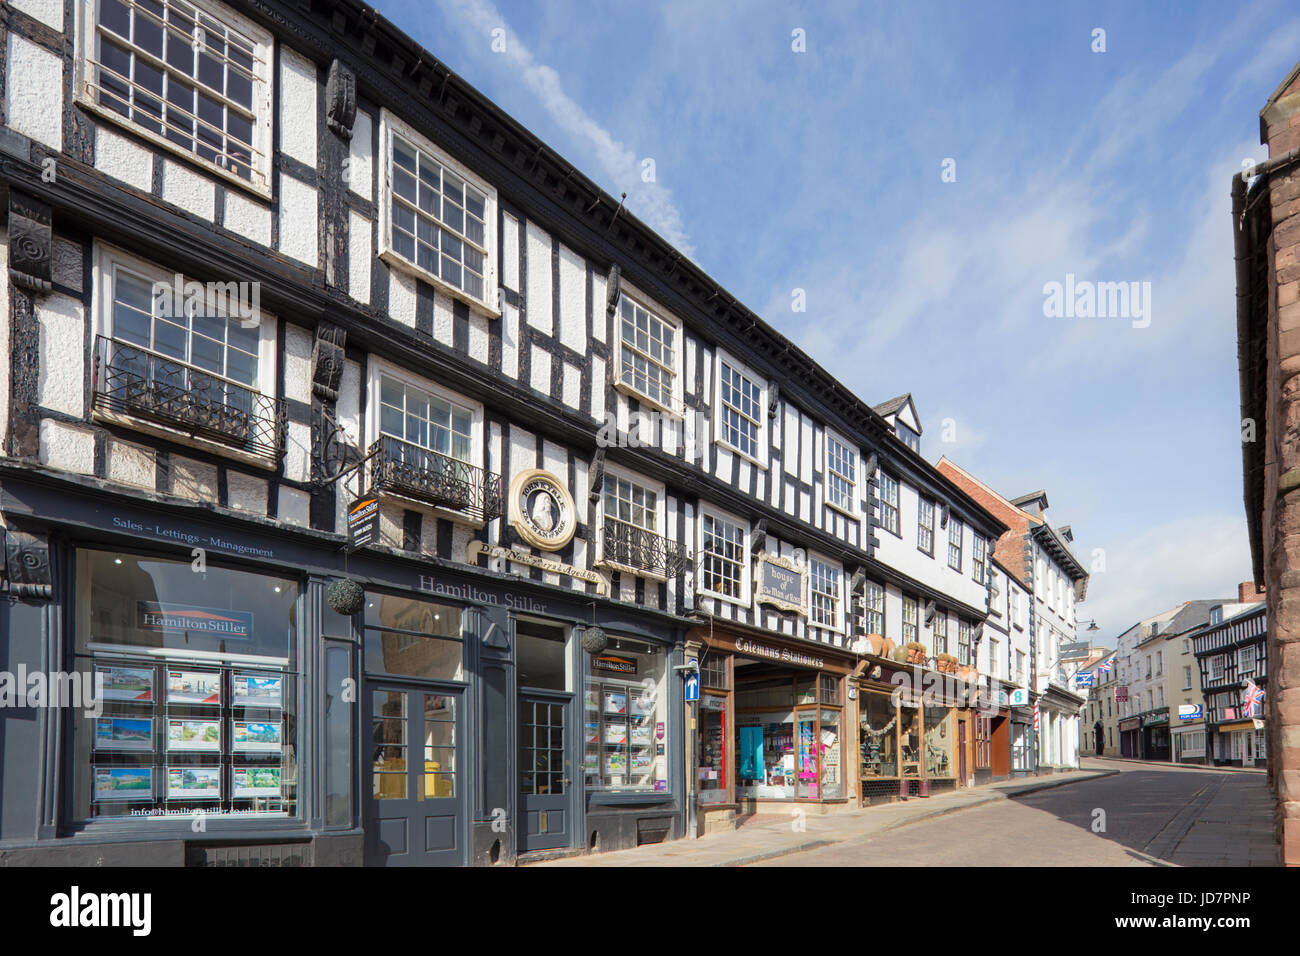 Historic buildings in Ross on Wye, Herefordshire, England, UK Stock Photo